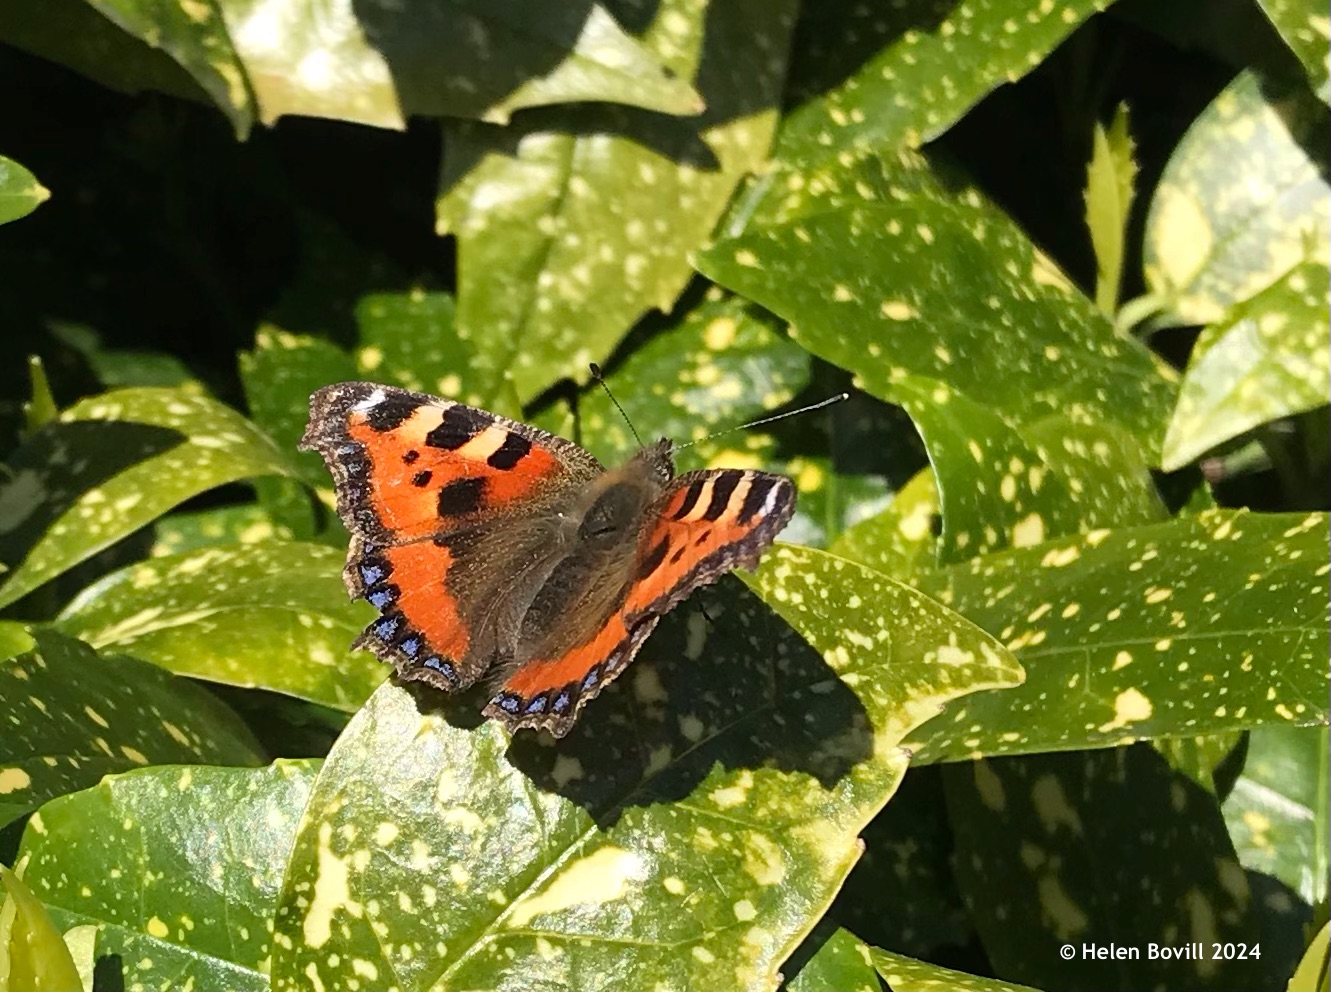 A small tortoiseshell butterfly resting on a spotted laurel leaf